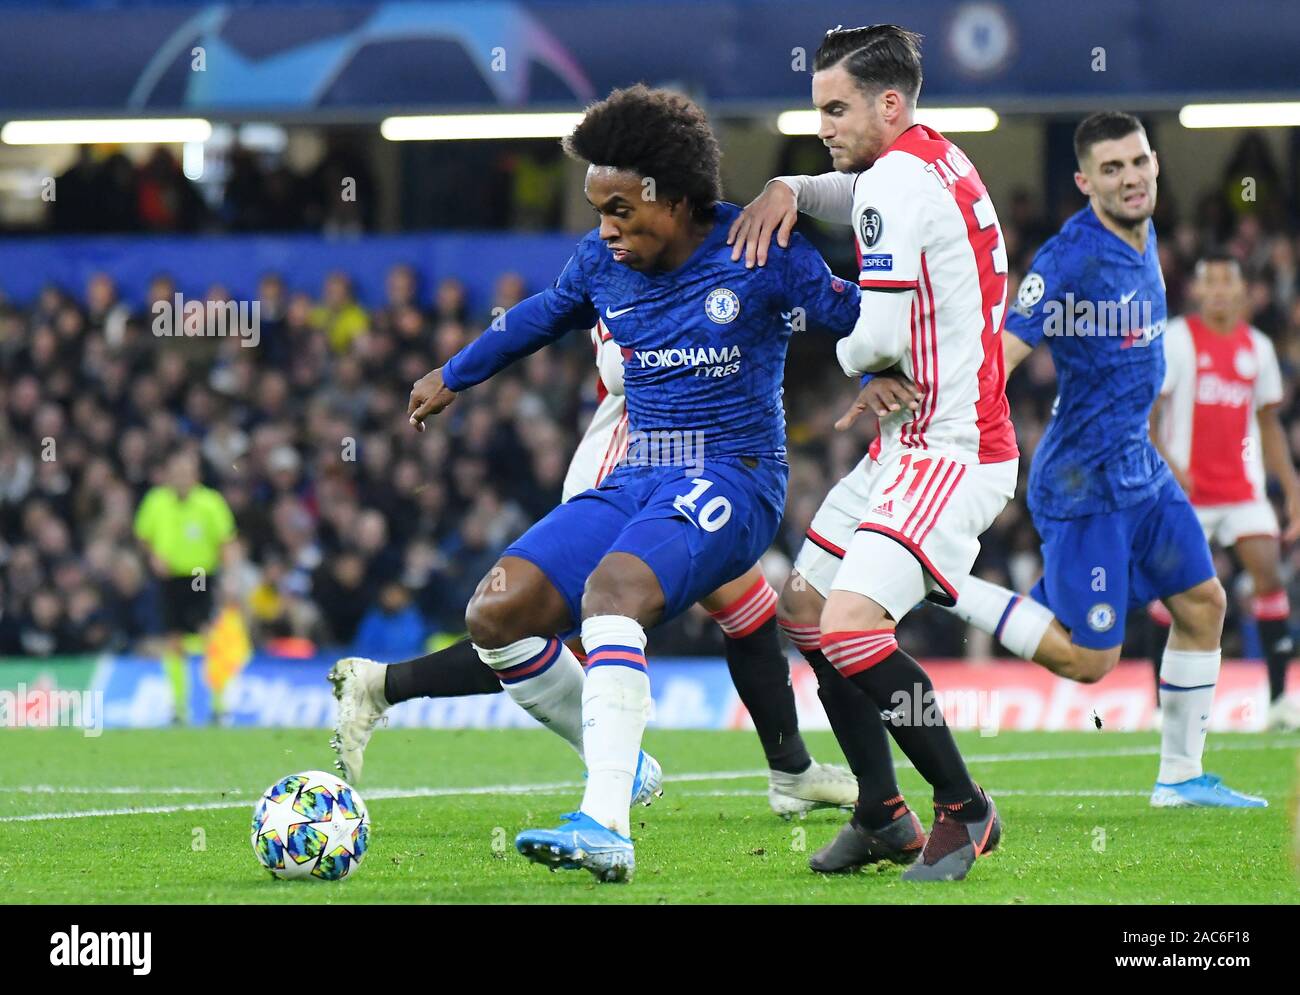 LONDON, ENGLAND - NOVEMBER 5, 2019: Willian Borges da Silva of Chelsea and Nicolas Tagliafico of Ajax pictured during the 2019/20 UEFA Champions League Group H game between Chelsea FC (England) and AFC Ajax (Netherlands) at Stamford Bridge. Stock Photo